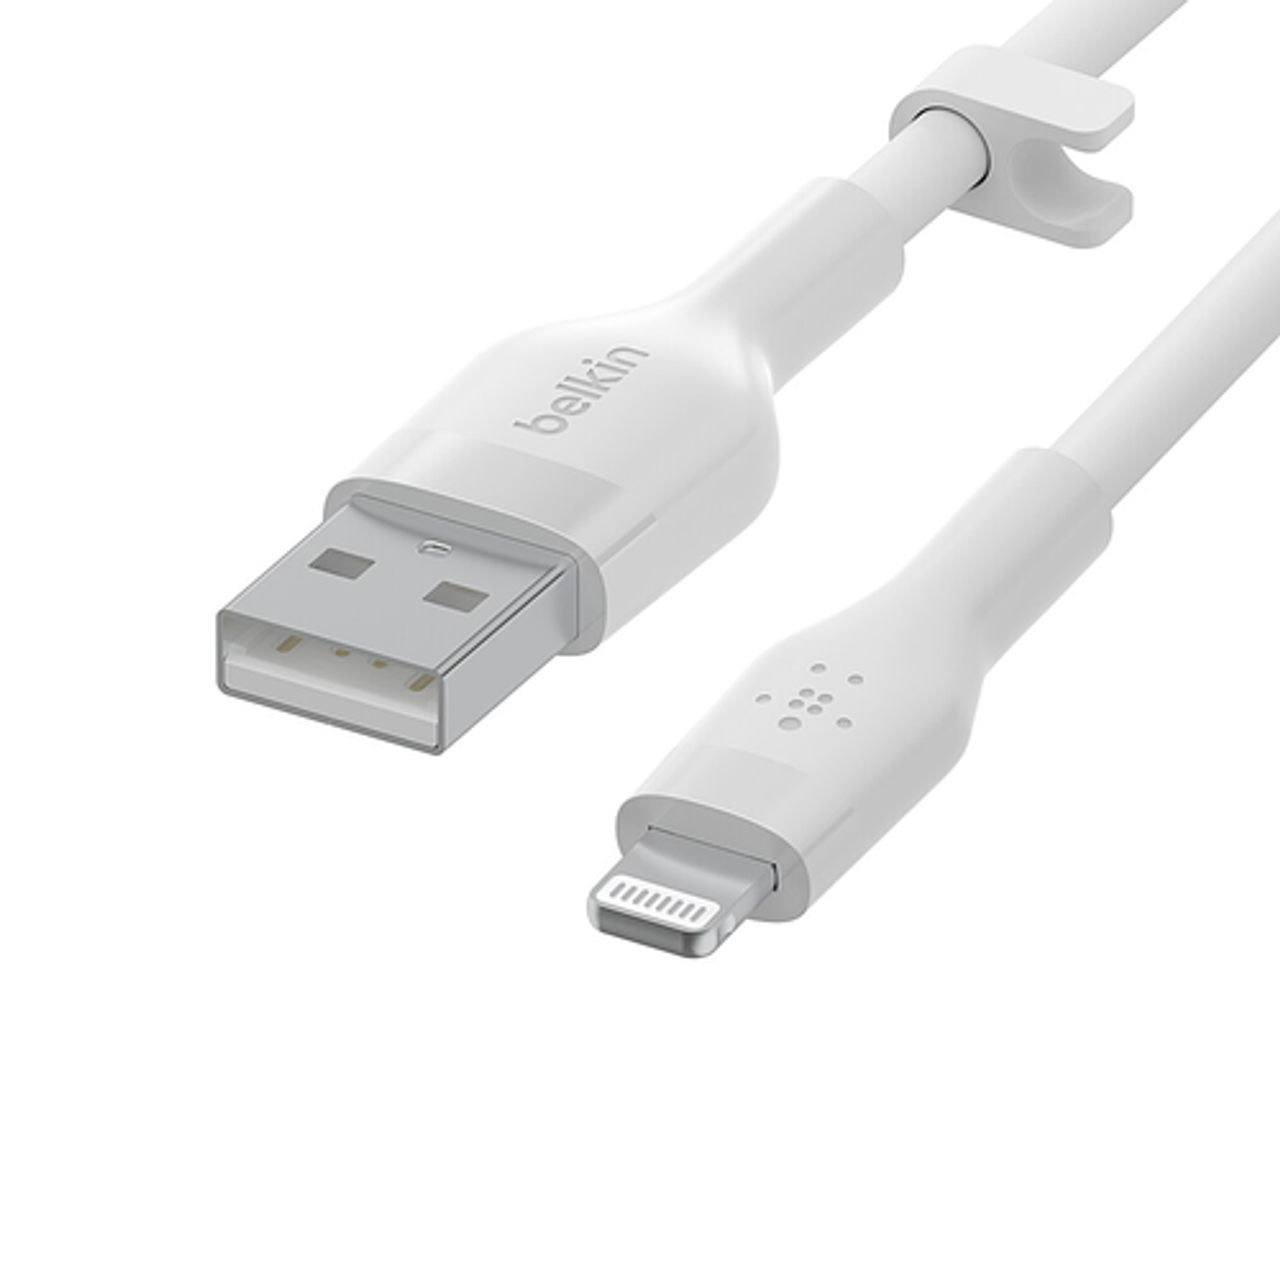 Belkin - BOOSTCHARGE Flex USB-A Cable with Lightning Connector - White